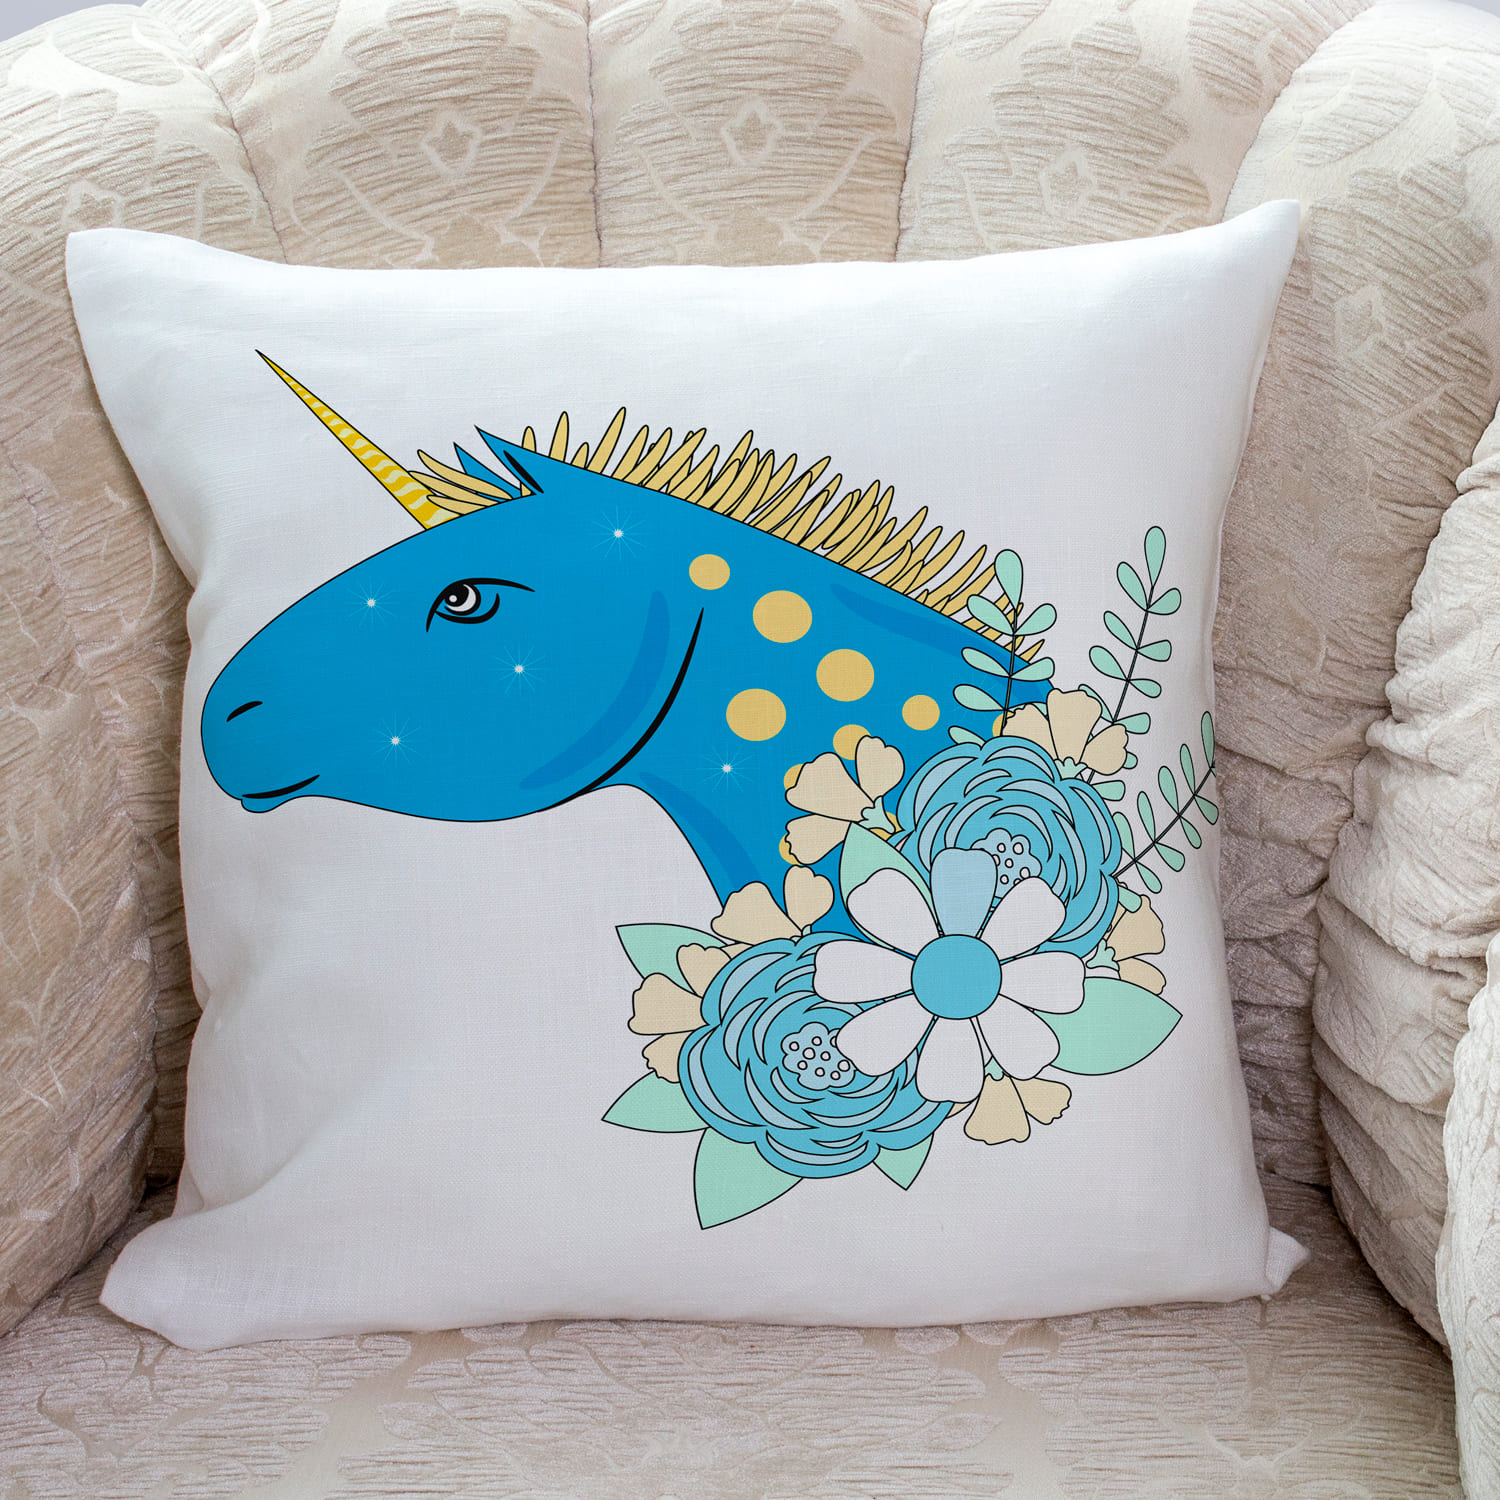 Cute pillow with unicorn print.